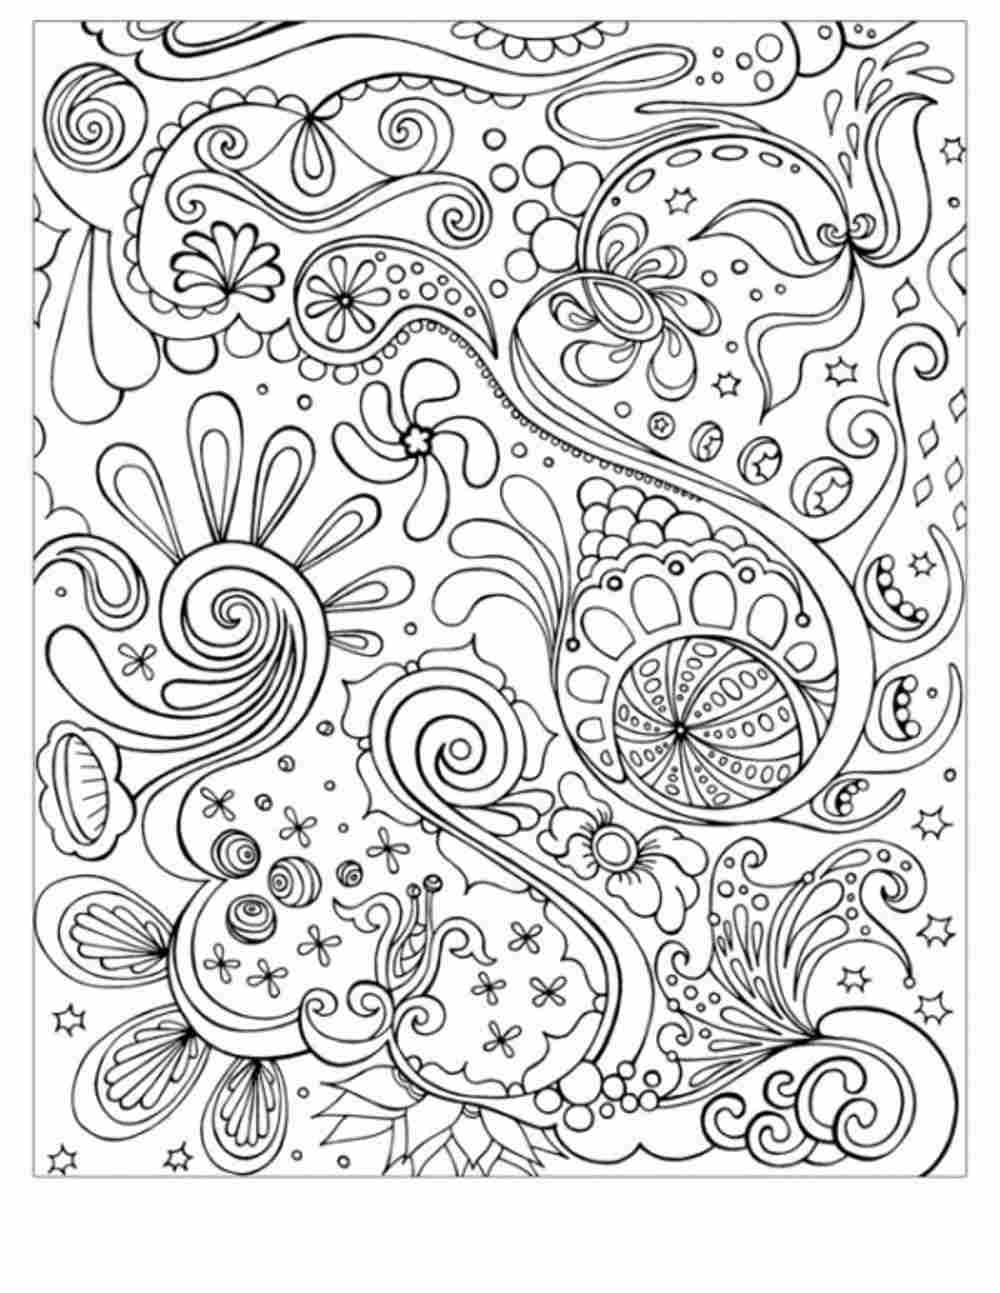 coloring-pages-adults-pdf-google-search-coloring-books-pinterest-634